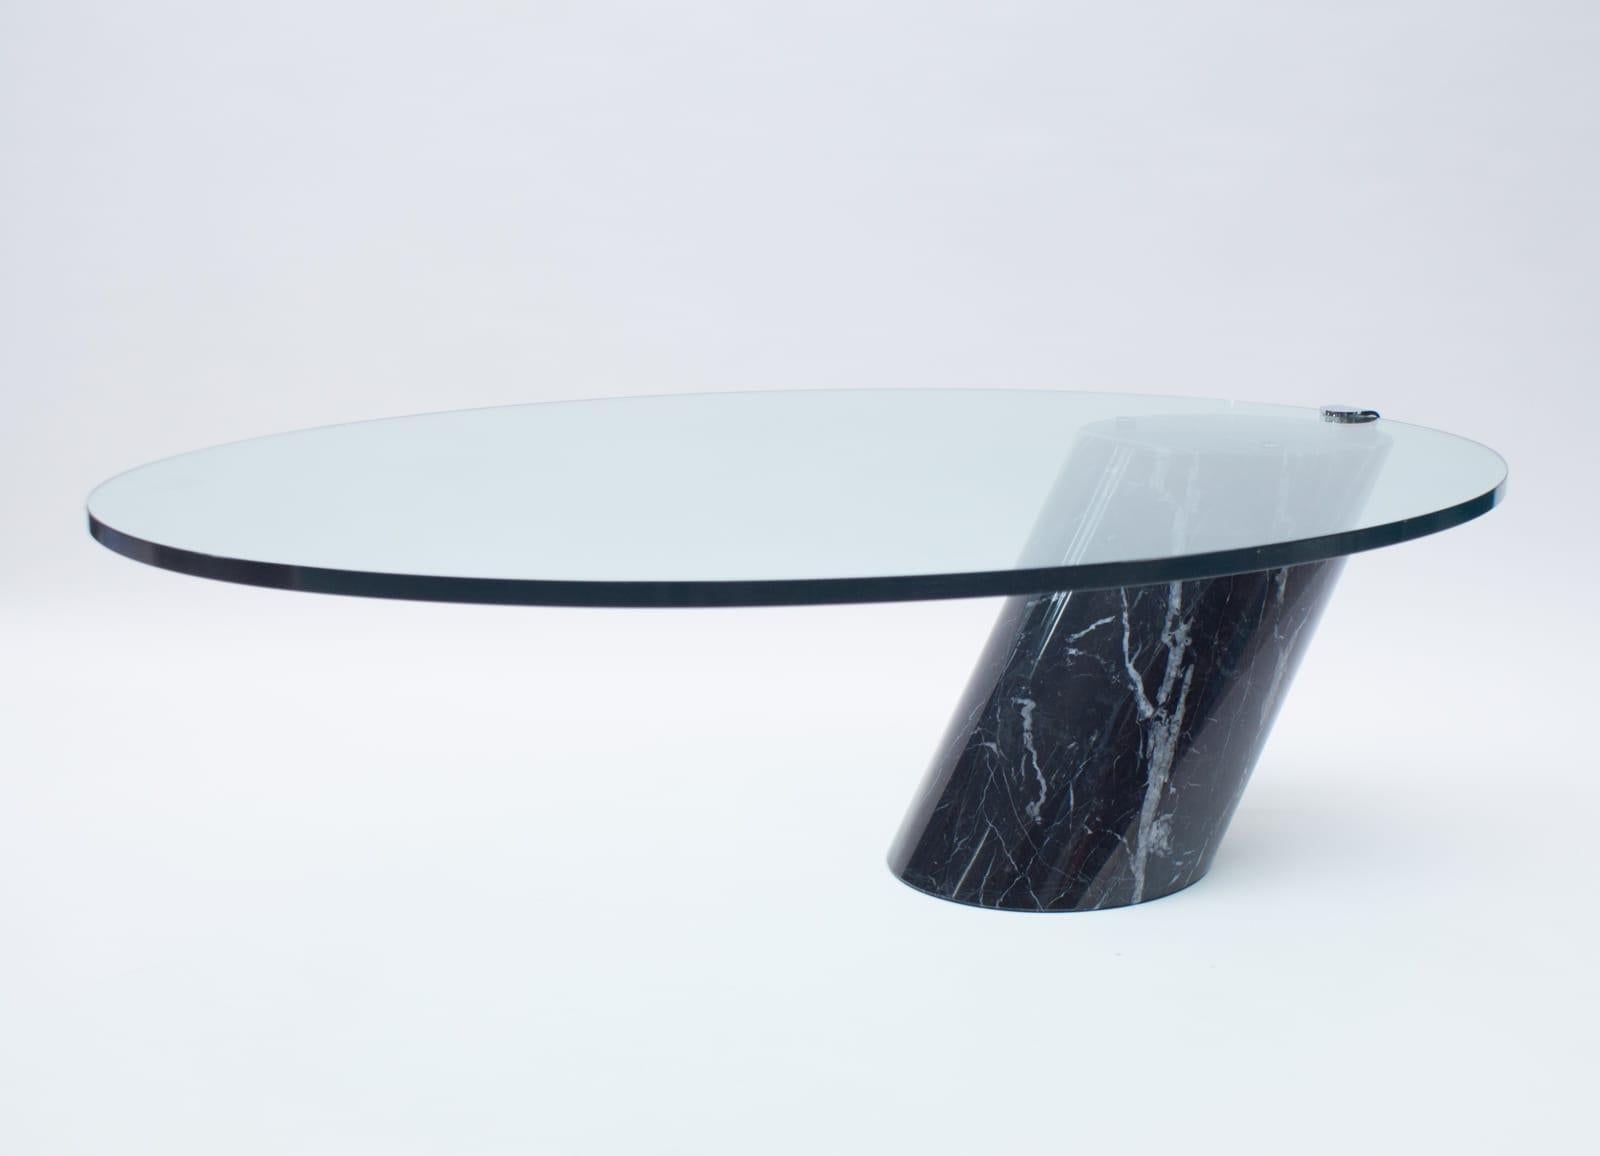 Black Italian marble with beautiful white veining.

Coffee table designed by Team Form for Ronald Schmitt in the 1970s. The base of this table is made from solid marble. 

The thick oval glass top lays loose on the marble base only held in to